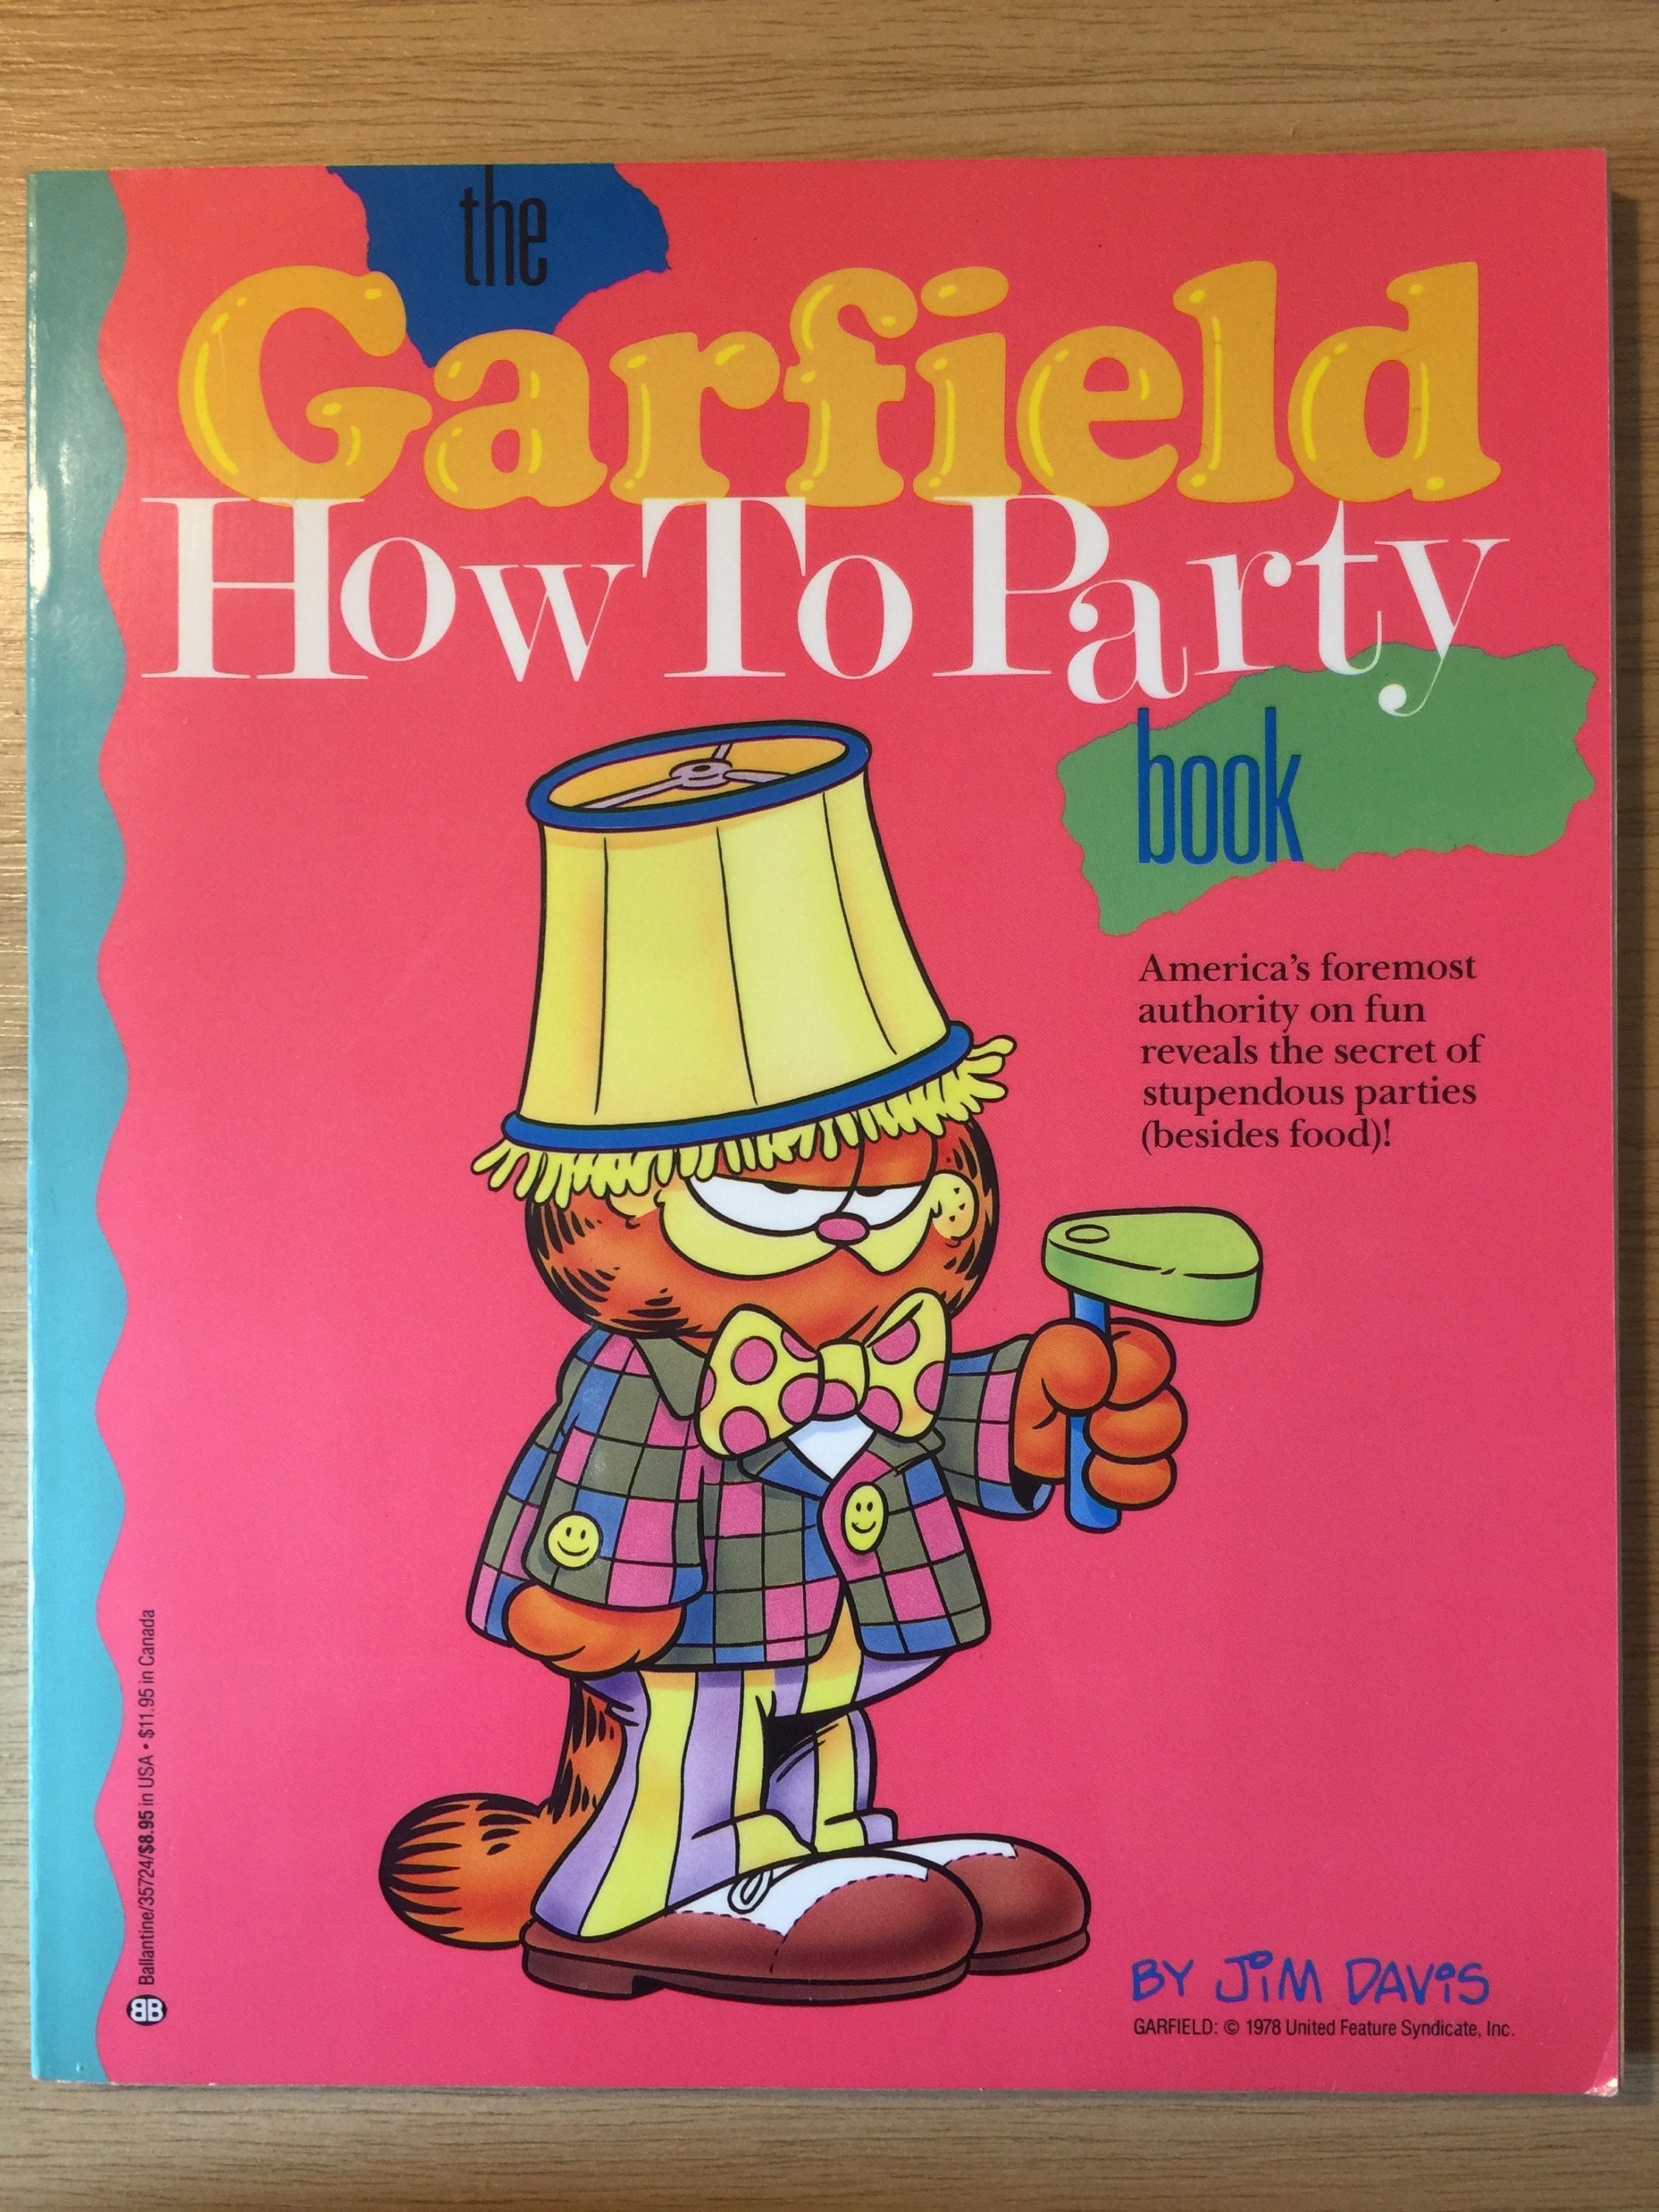 RARE Vintage 1988 First Edition garfield How to Party image